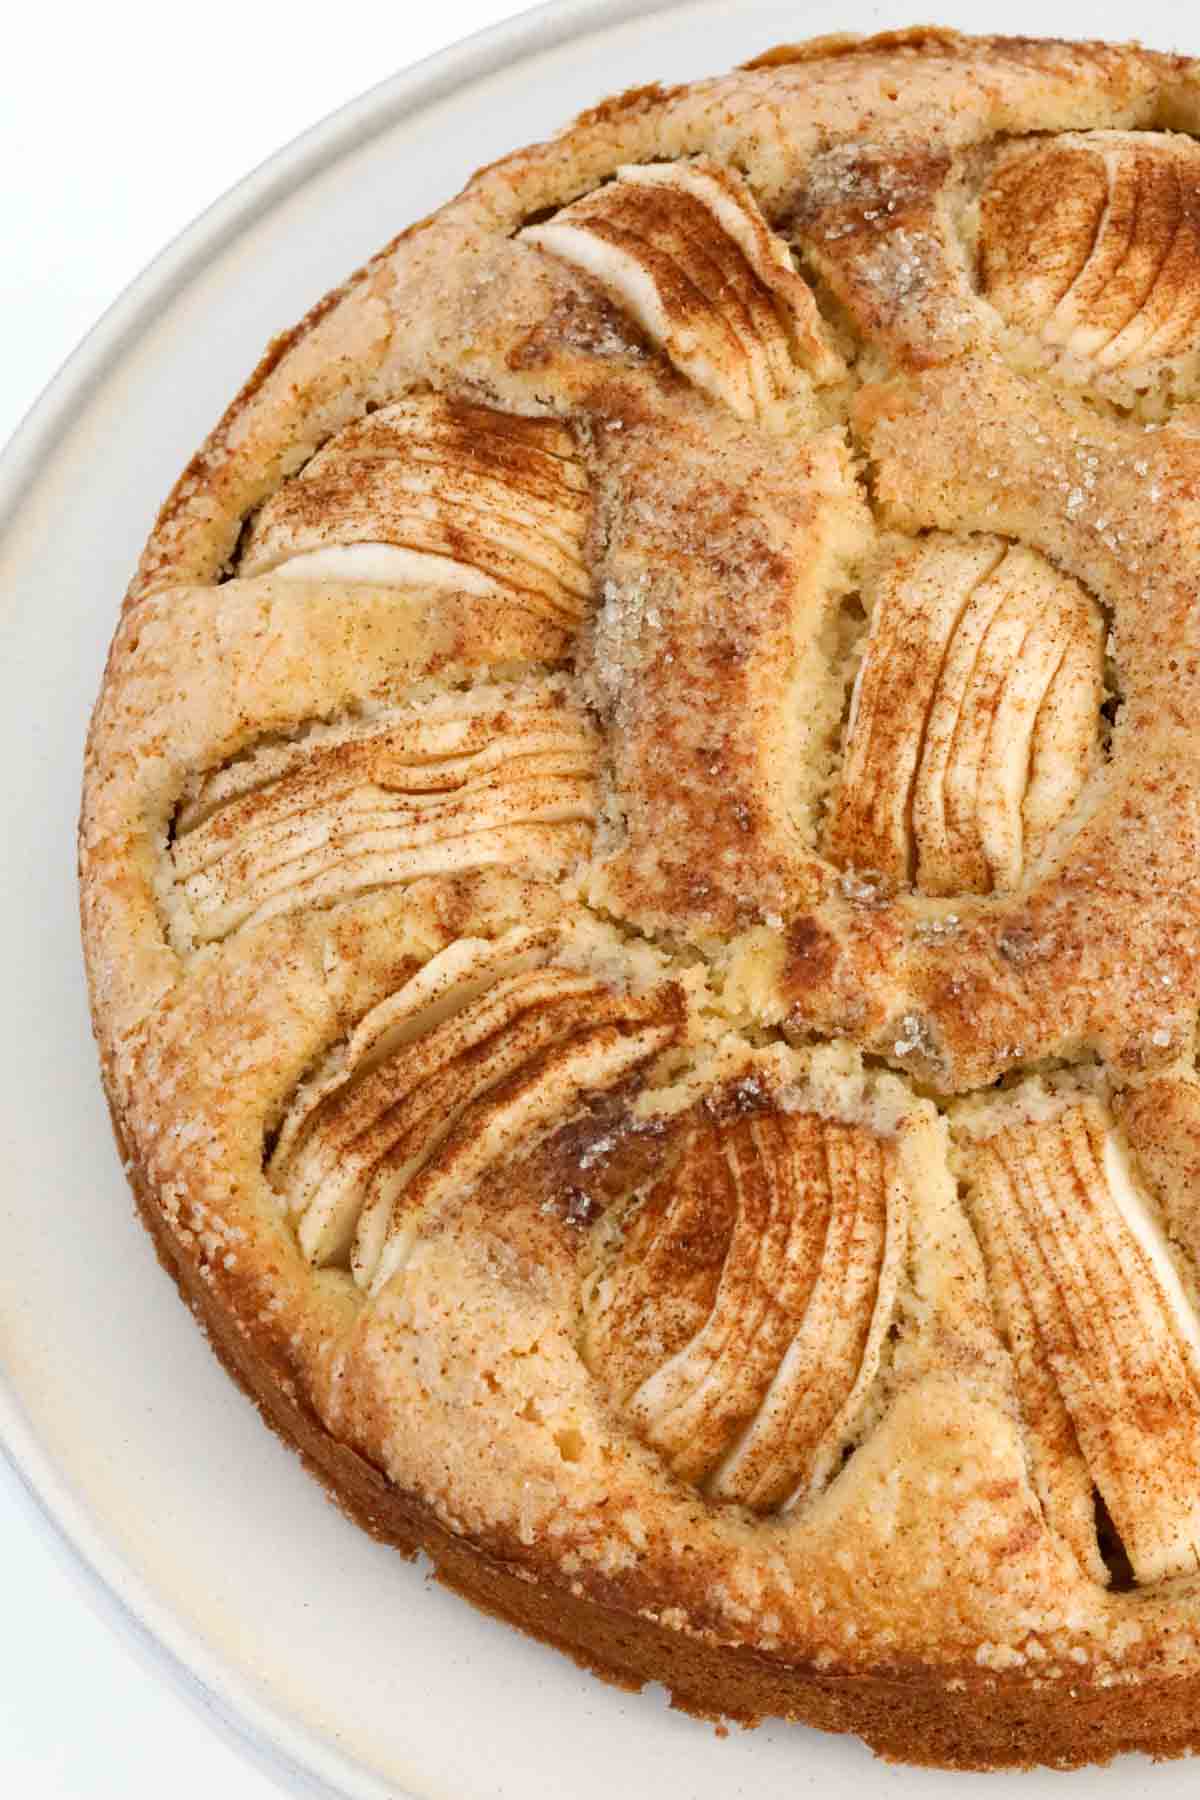 An overhead shot of Apple cake baked with cinnamon and crunchy sugar sprinkled on top.